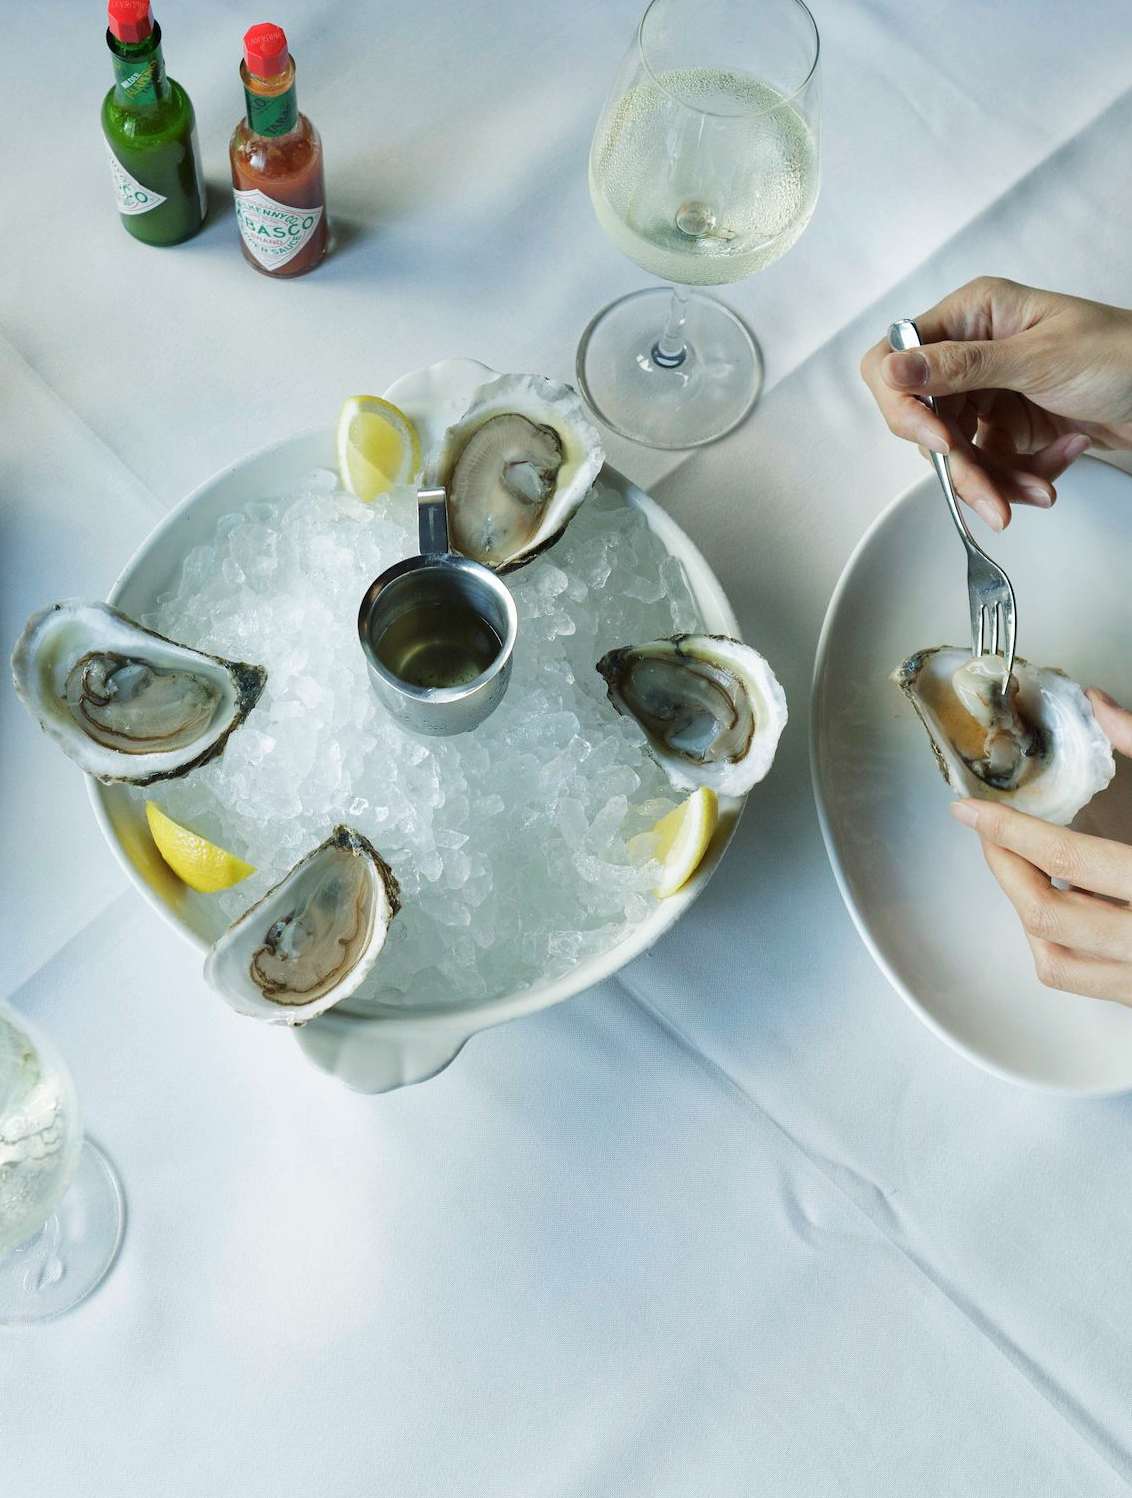 Oysters from Luke's Oyster Bar & Chop House